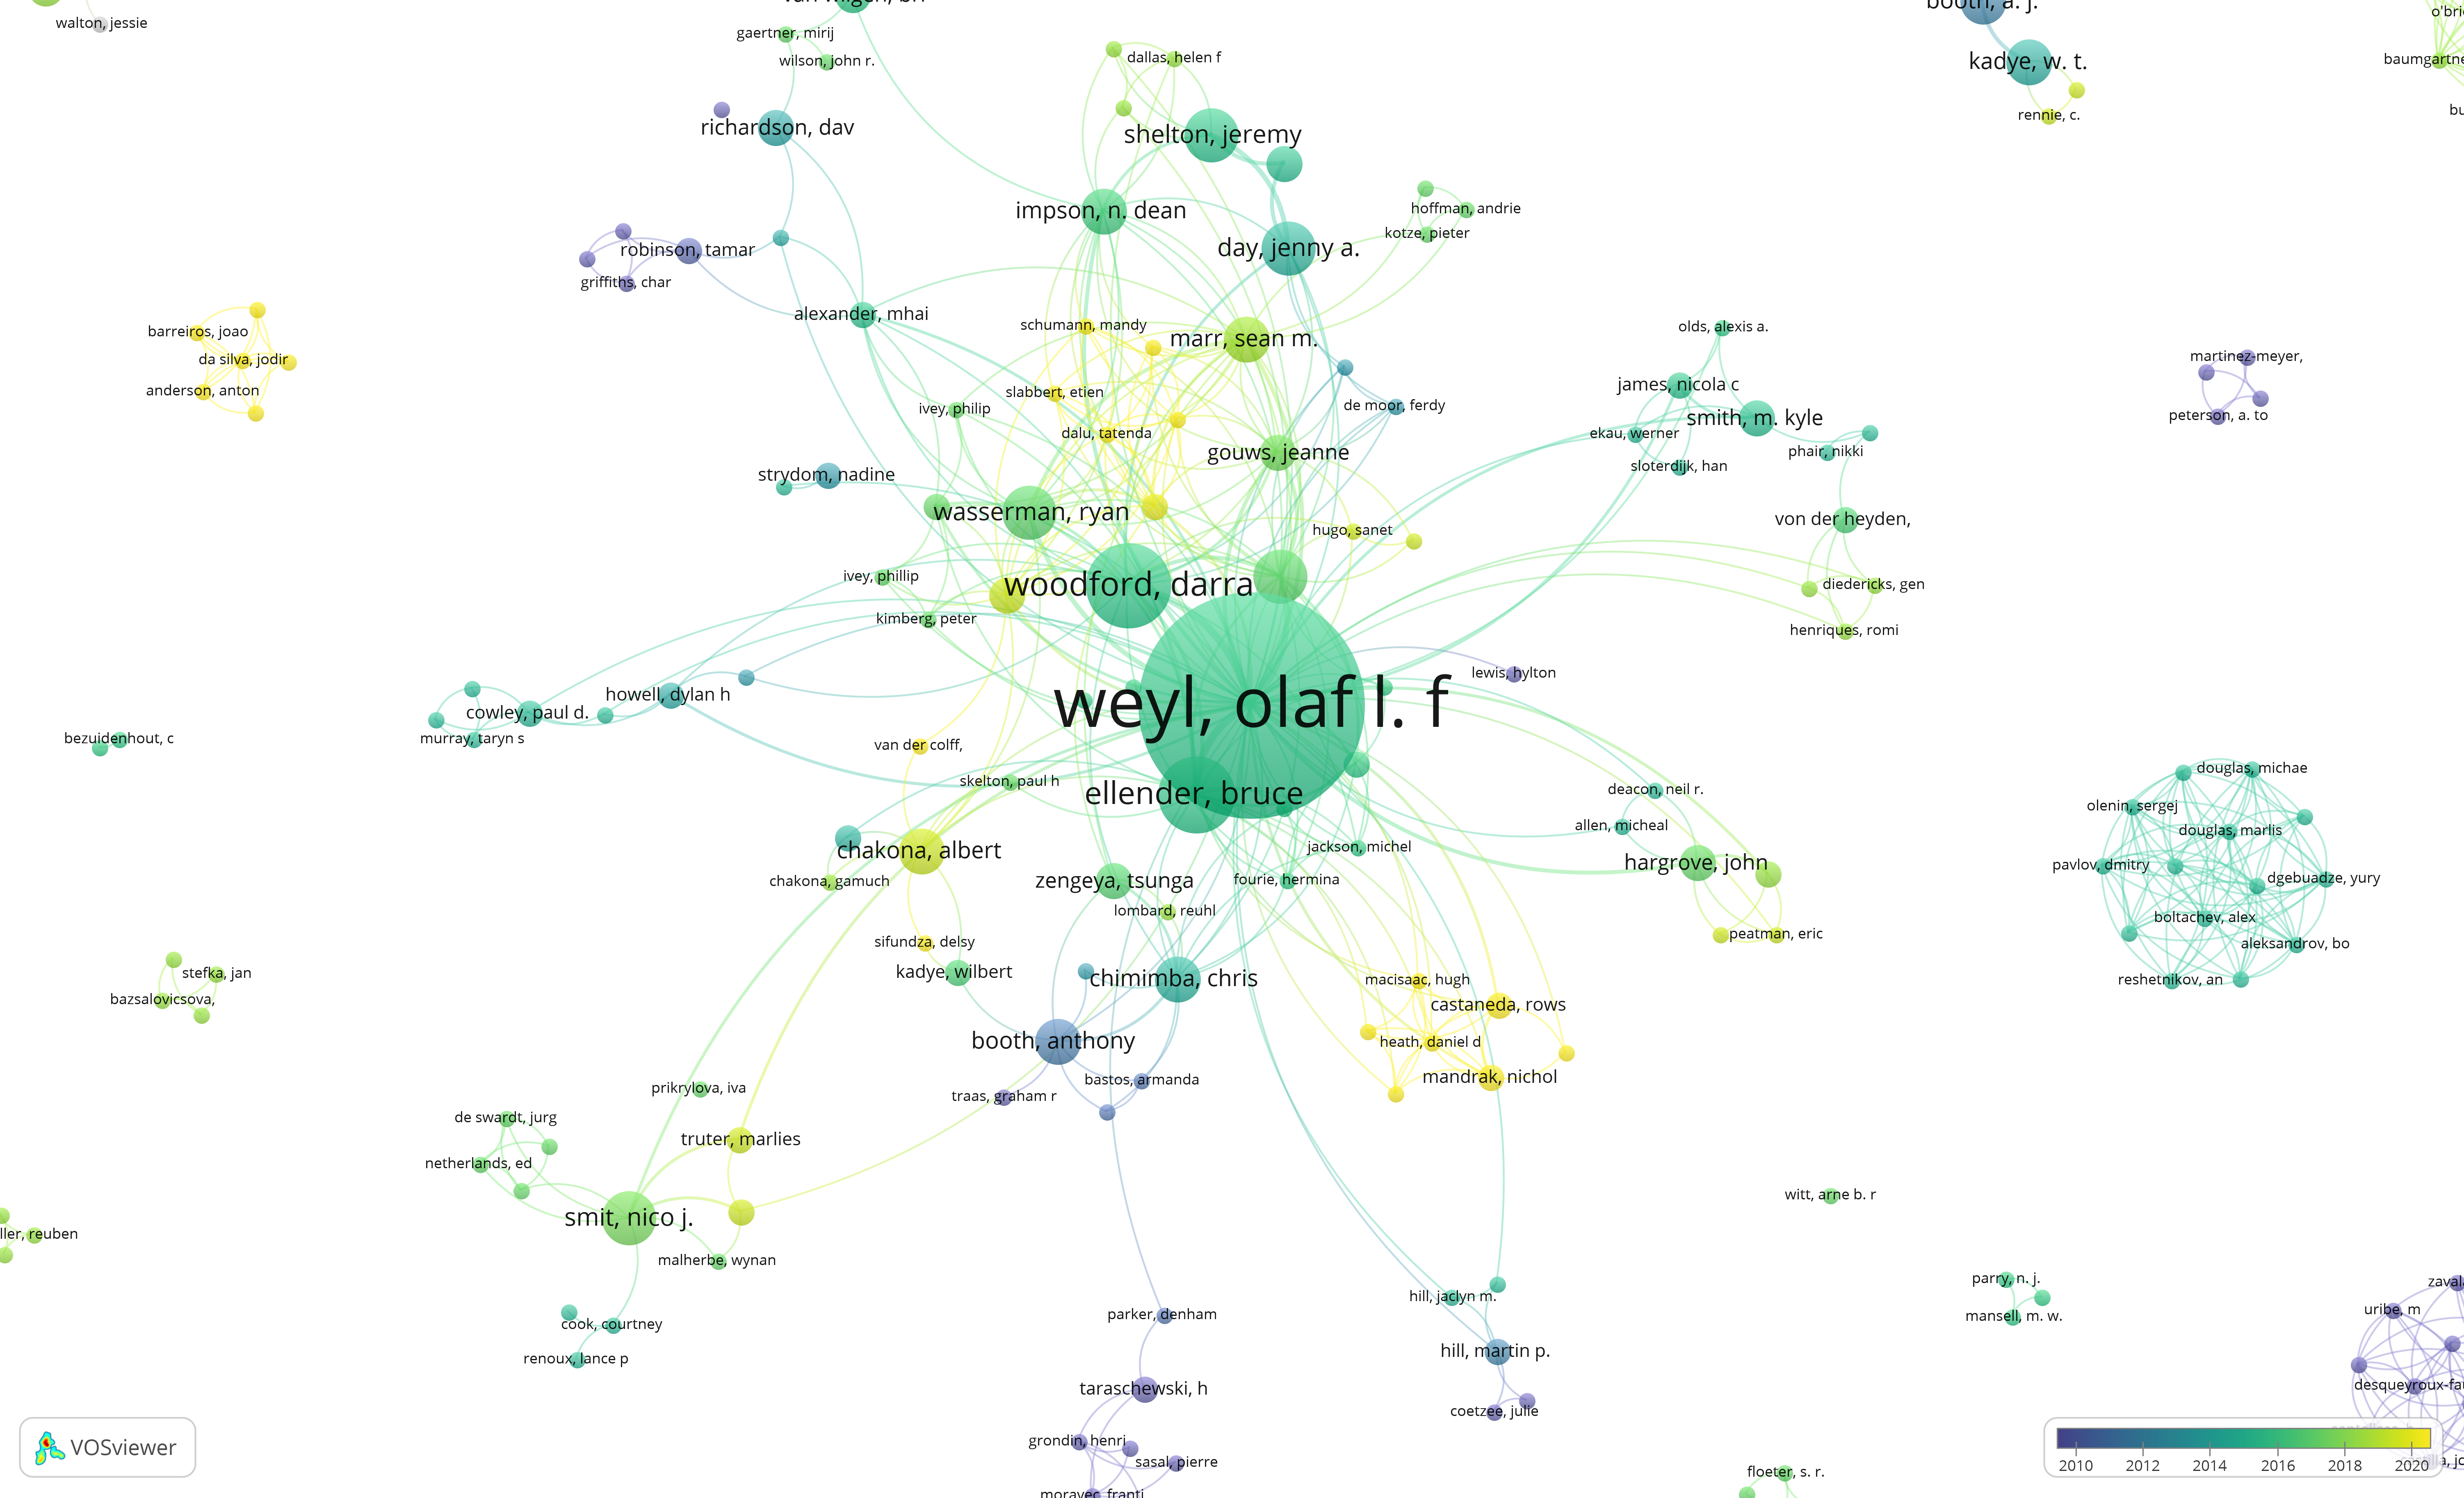 An author network for the Web of Science search for “Invasive fish” AND “South Africa”. In this author network you will see my friend and colleague, the late Prof. Olaf Weyl, who is at the centre of a large group of people who worked on invasive fish in South Africa. Olaf’s wasn’t the only research group, but certainly the most influential and joined up. Olaf’s collaborations were extensive, spanning continents and generations of researchers. Drawn with VOSviewer (van Eck & Waltman, 2010).